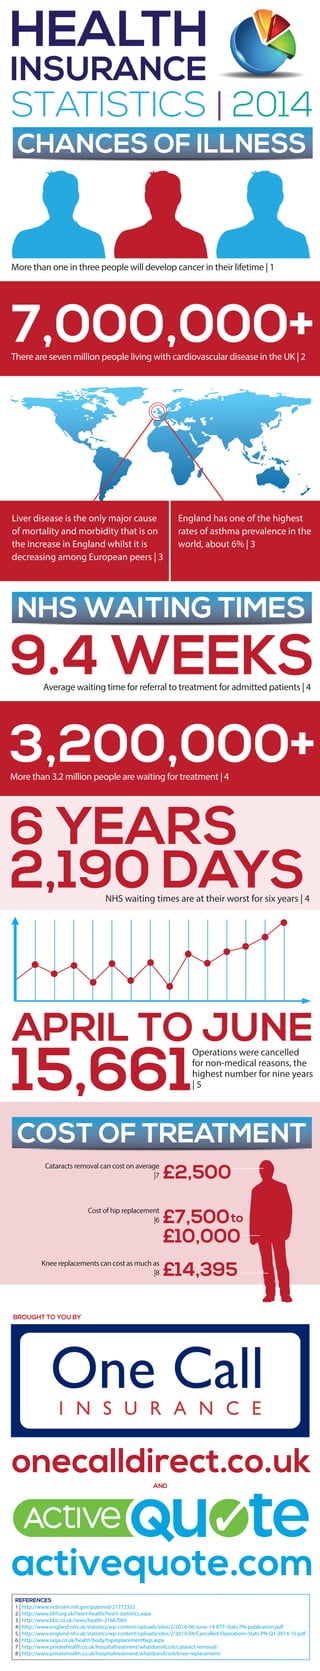 INSURANCE
HEALTH
STATISTICS | 2014
There are seven million people living with cardiovascular disease in the UK | 2
Operations were cancelled
for non-medical reasons, the
highest number for nine years
| 5
CHANCES OF ILLNESS
7,000,000+
NHS WAITING TIMES
More than one in three people will develop cancer in their lifetime | 1
More than 3.2 million people are waiting for treatment | 4
3,200,000+
6 YEARS
COST OF TREATMENT
2,190 DAYS
9.4 WEEKS
15,661
onecalldirect.co.uk
REFERENCES
1 | http://www.ncbi.nlm.nih.gov/pubmed/21772332
2 | http://www.bhf.org.uk/heart-health/heart-statistics.aspx
3 | http://www.bbc.co.uk/news/health-21667065
4 | http://www.england.nhs.uk/statistics/wp-content/uploads/sites/2/2014/06/June-14-RTT-Stats-PN-publication.pdf
5 | http://www.england.nhs.uk/statistics/wp-content/uploads/sites/2/2013/04/Cancelled-Operations-Stats-PN-Q1-2014-15.pdf
6 | http://www.saga.co.uk/health/body/hipreplacementfaqs.aspx
7 | http://www.privatehealth.co.uk/hospitaltreatment/whatdoesitcost/cataract-removal/
8 | http://www.privatehealth.co.uk/hospitaltreatment/whatdoesitcost/knee-replacement/
activequote.com
BROUGHT TO YOU BY
APRIL TO JUNE
NHS waiting times are at their worst for six years | 4
Average waiting time for referral to treatment for admitted patients | 4
England has one of the highest
rates of asthma prevalence in the
world, about 6% | 3
Liver disease is the only major cause
of mortality and morbidity that is on
the increase in England whilst it is
decreasing among European peers | 3
£2,500
Cataracts removal can cost on average
|7
£14,395
Knee replacements can cost as much as
|8
£7,500
£10,000
Cost of hip replacement
|6 to
AND
 